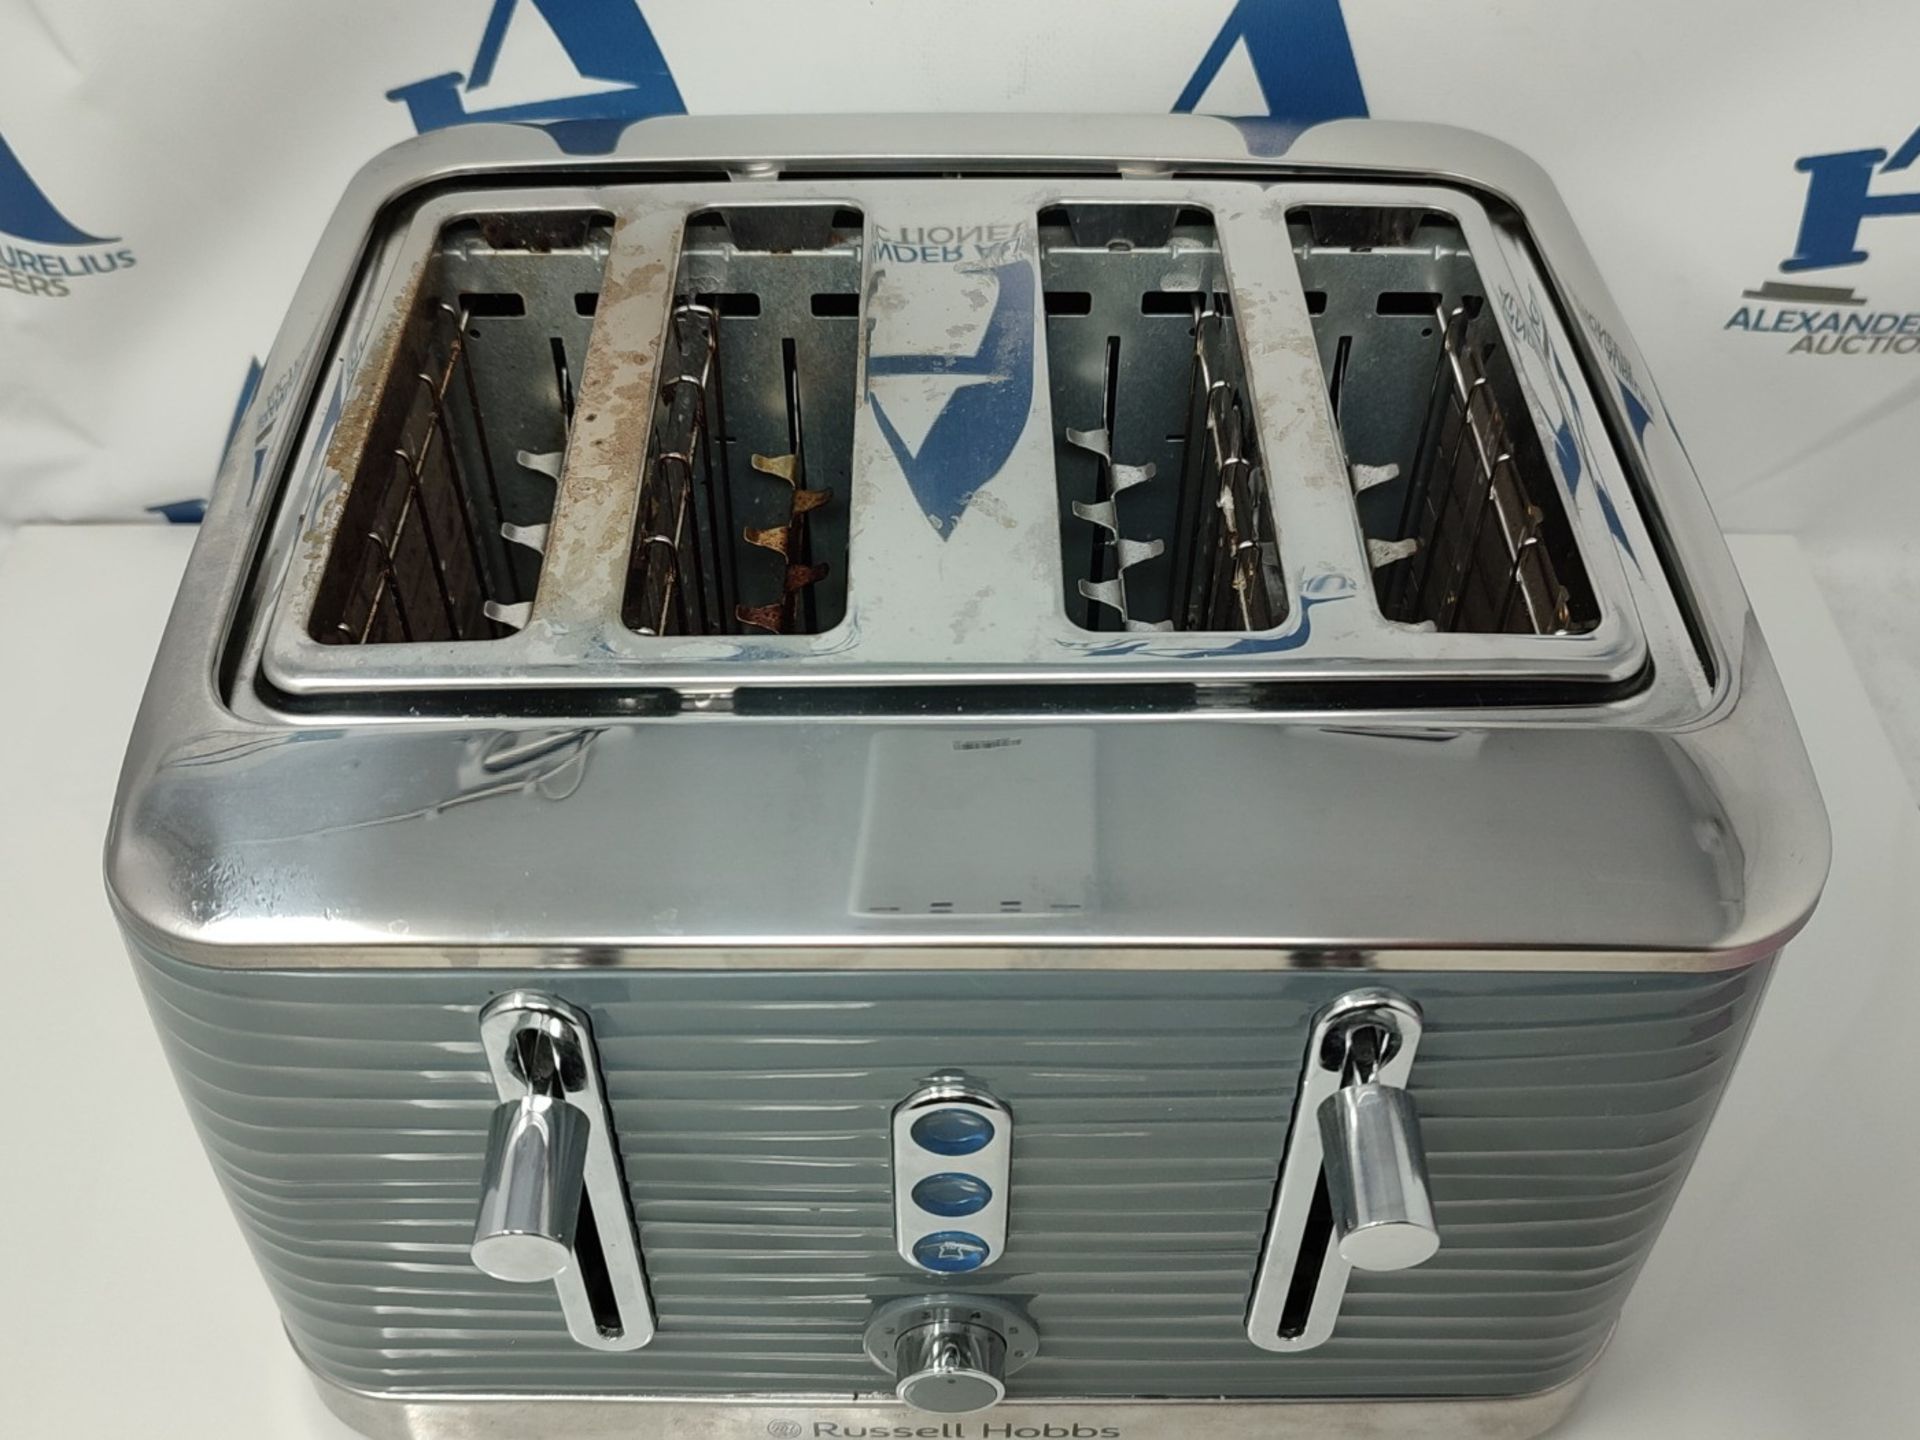 Russell Hobbs 24383 Grey Inspire 4 Slice Toaster, Wide Slot with Lift and Look Feature - Image 3 of 3